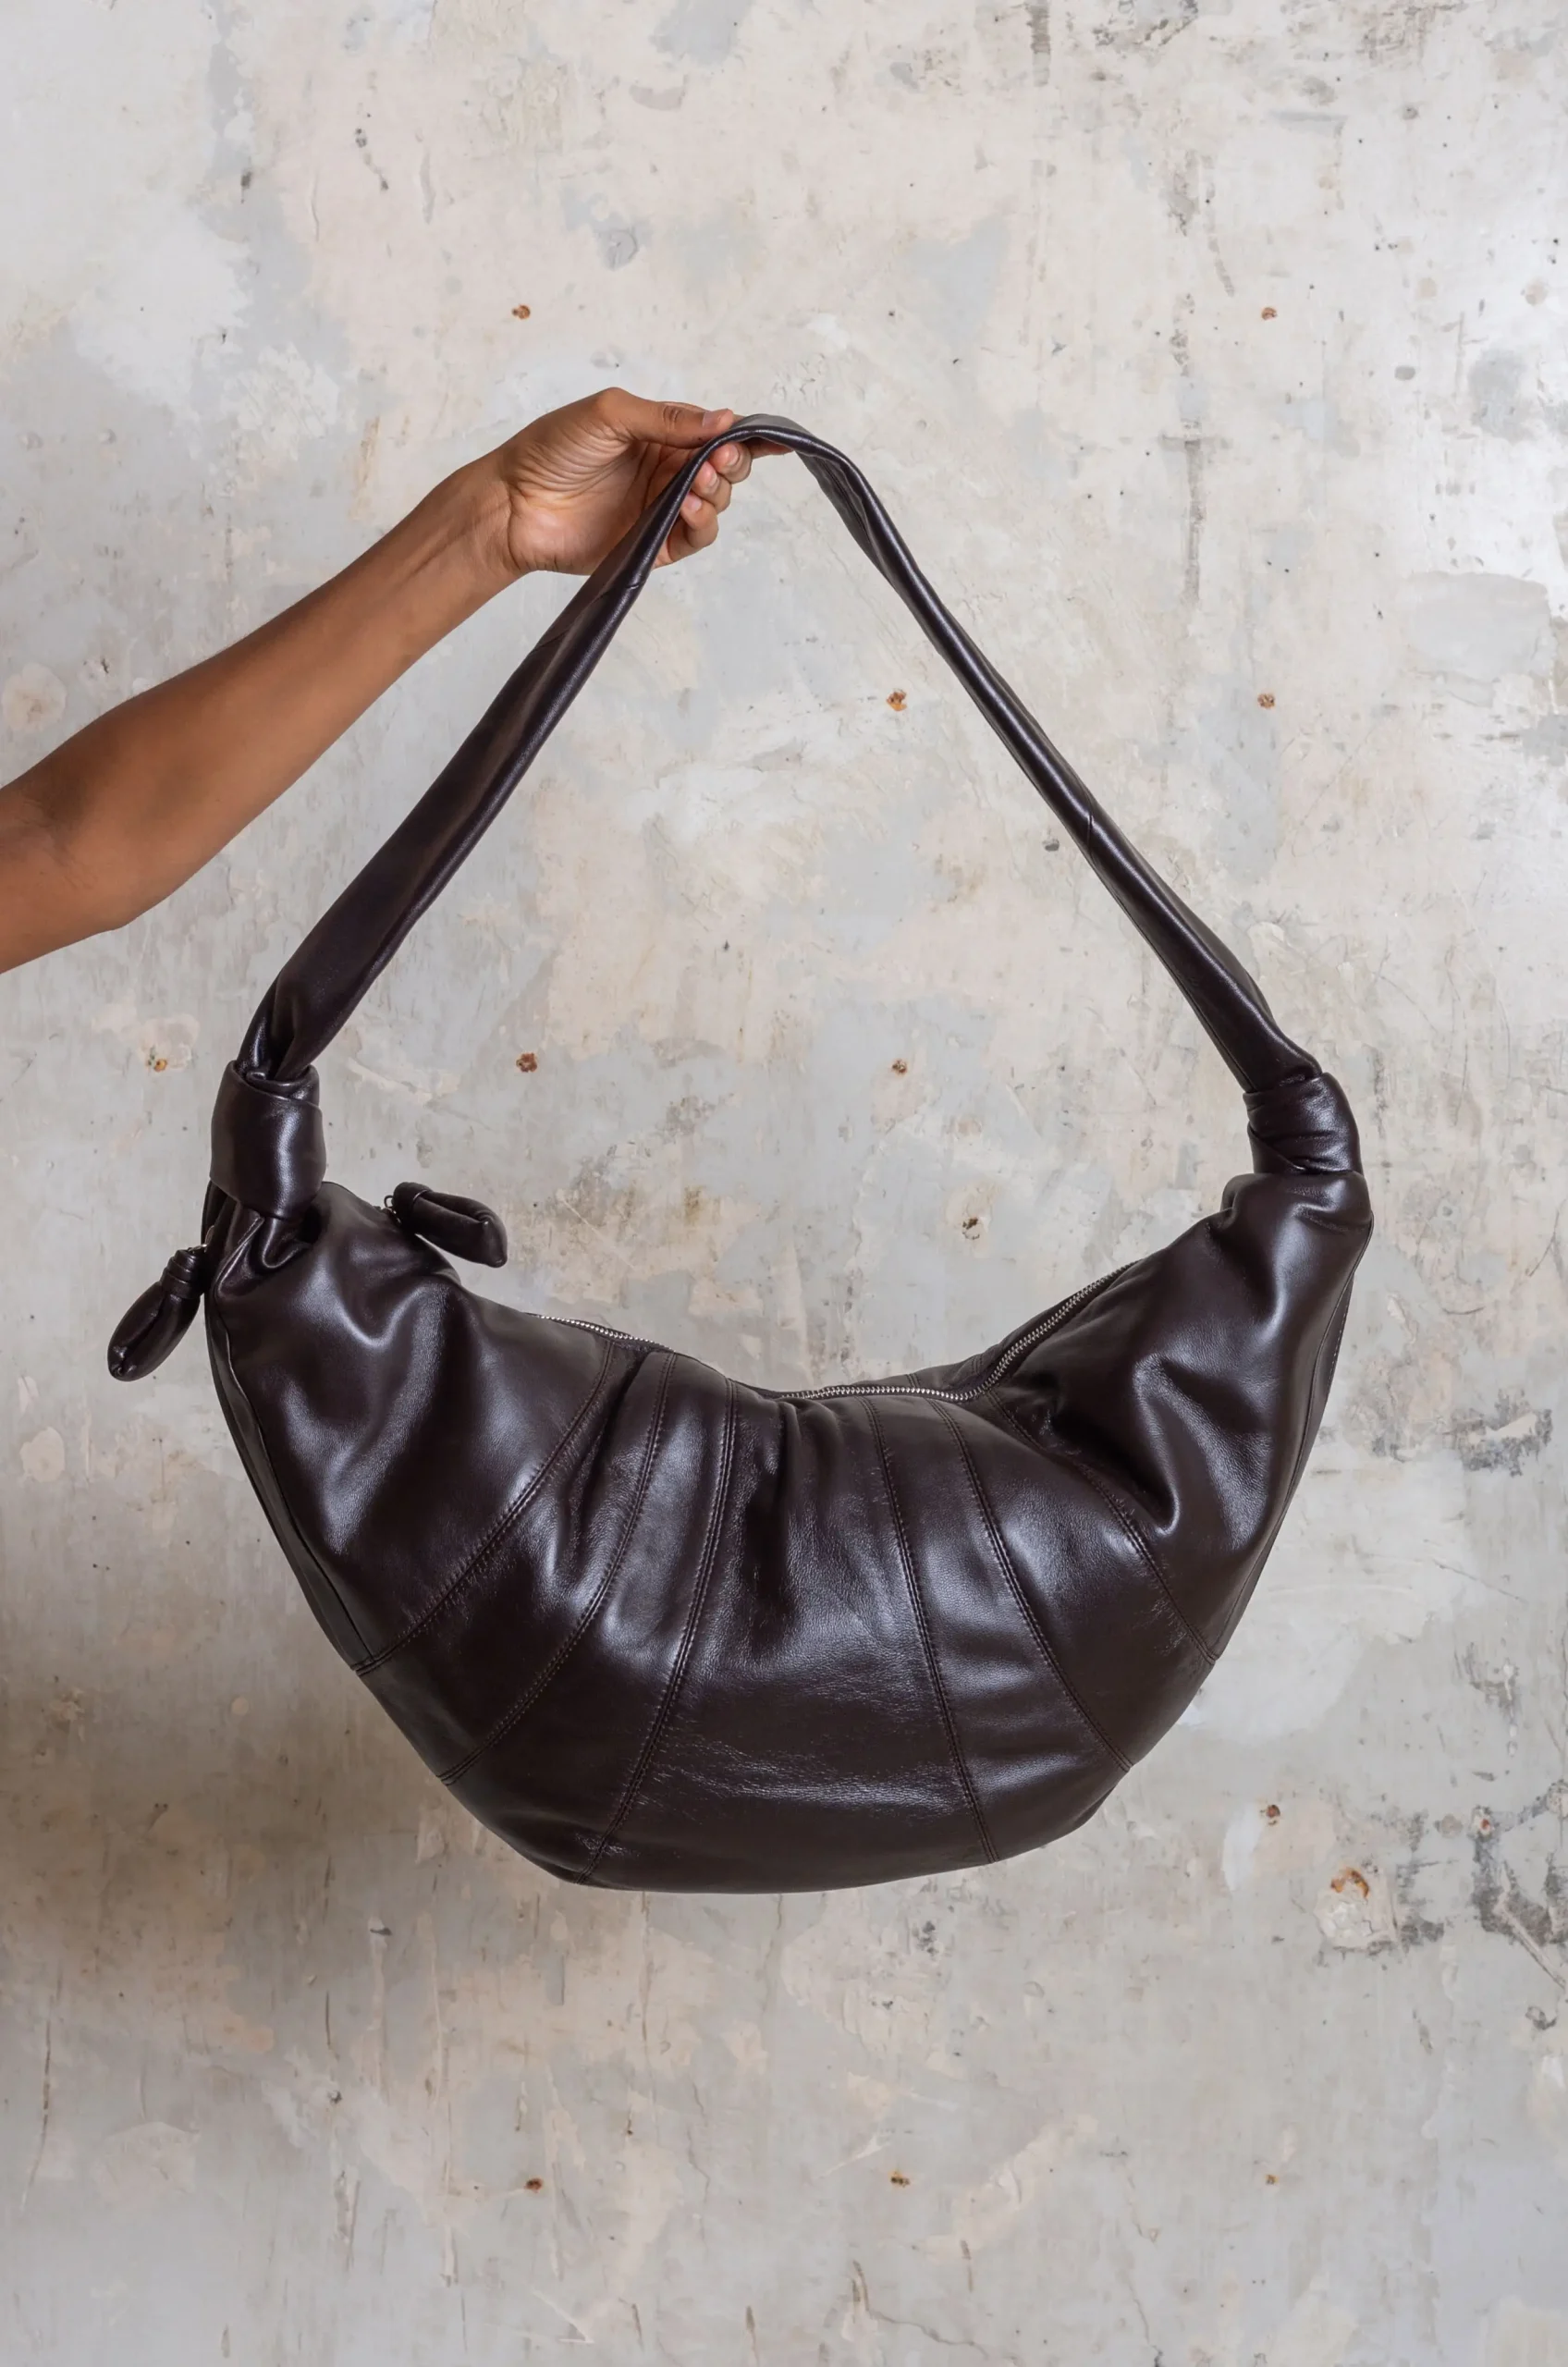 Lemaire Egg Bag in Dark Chocolate